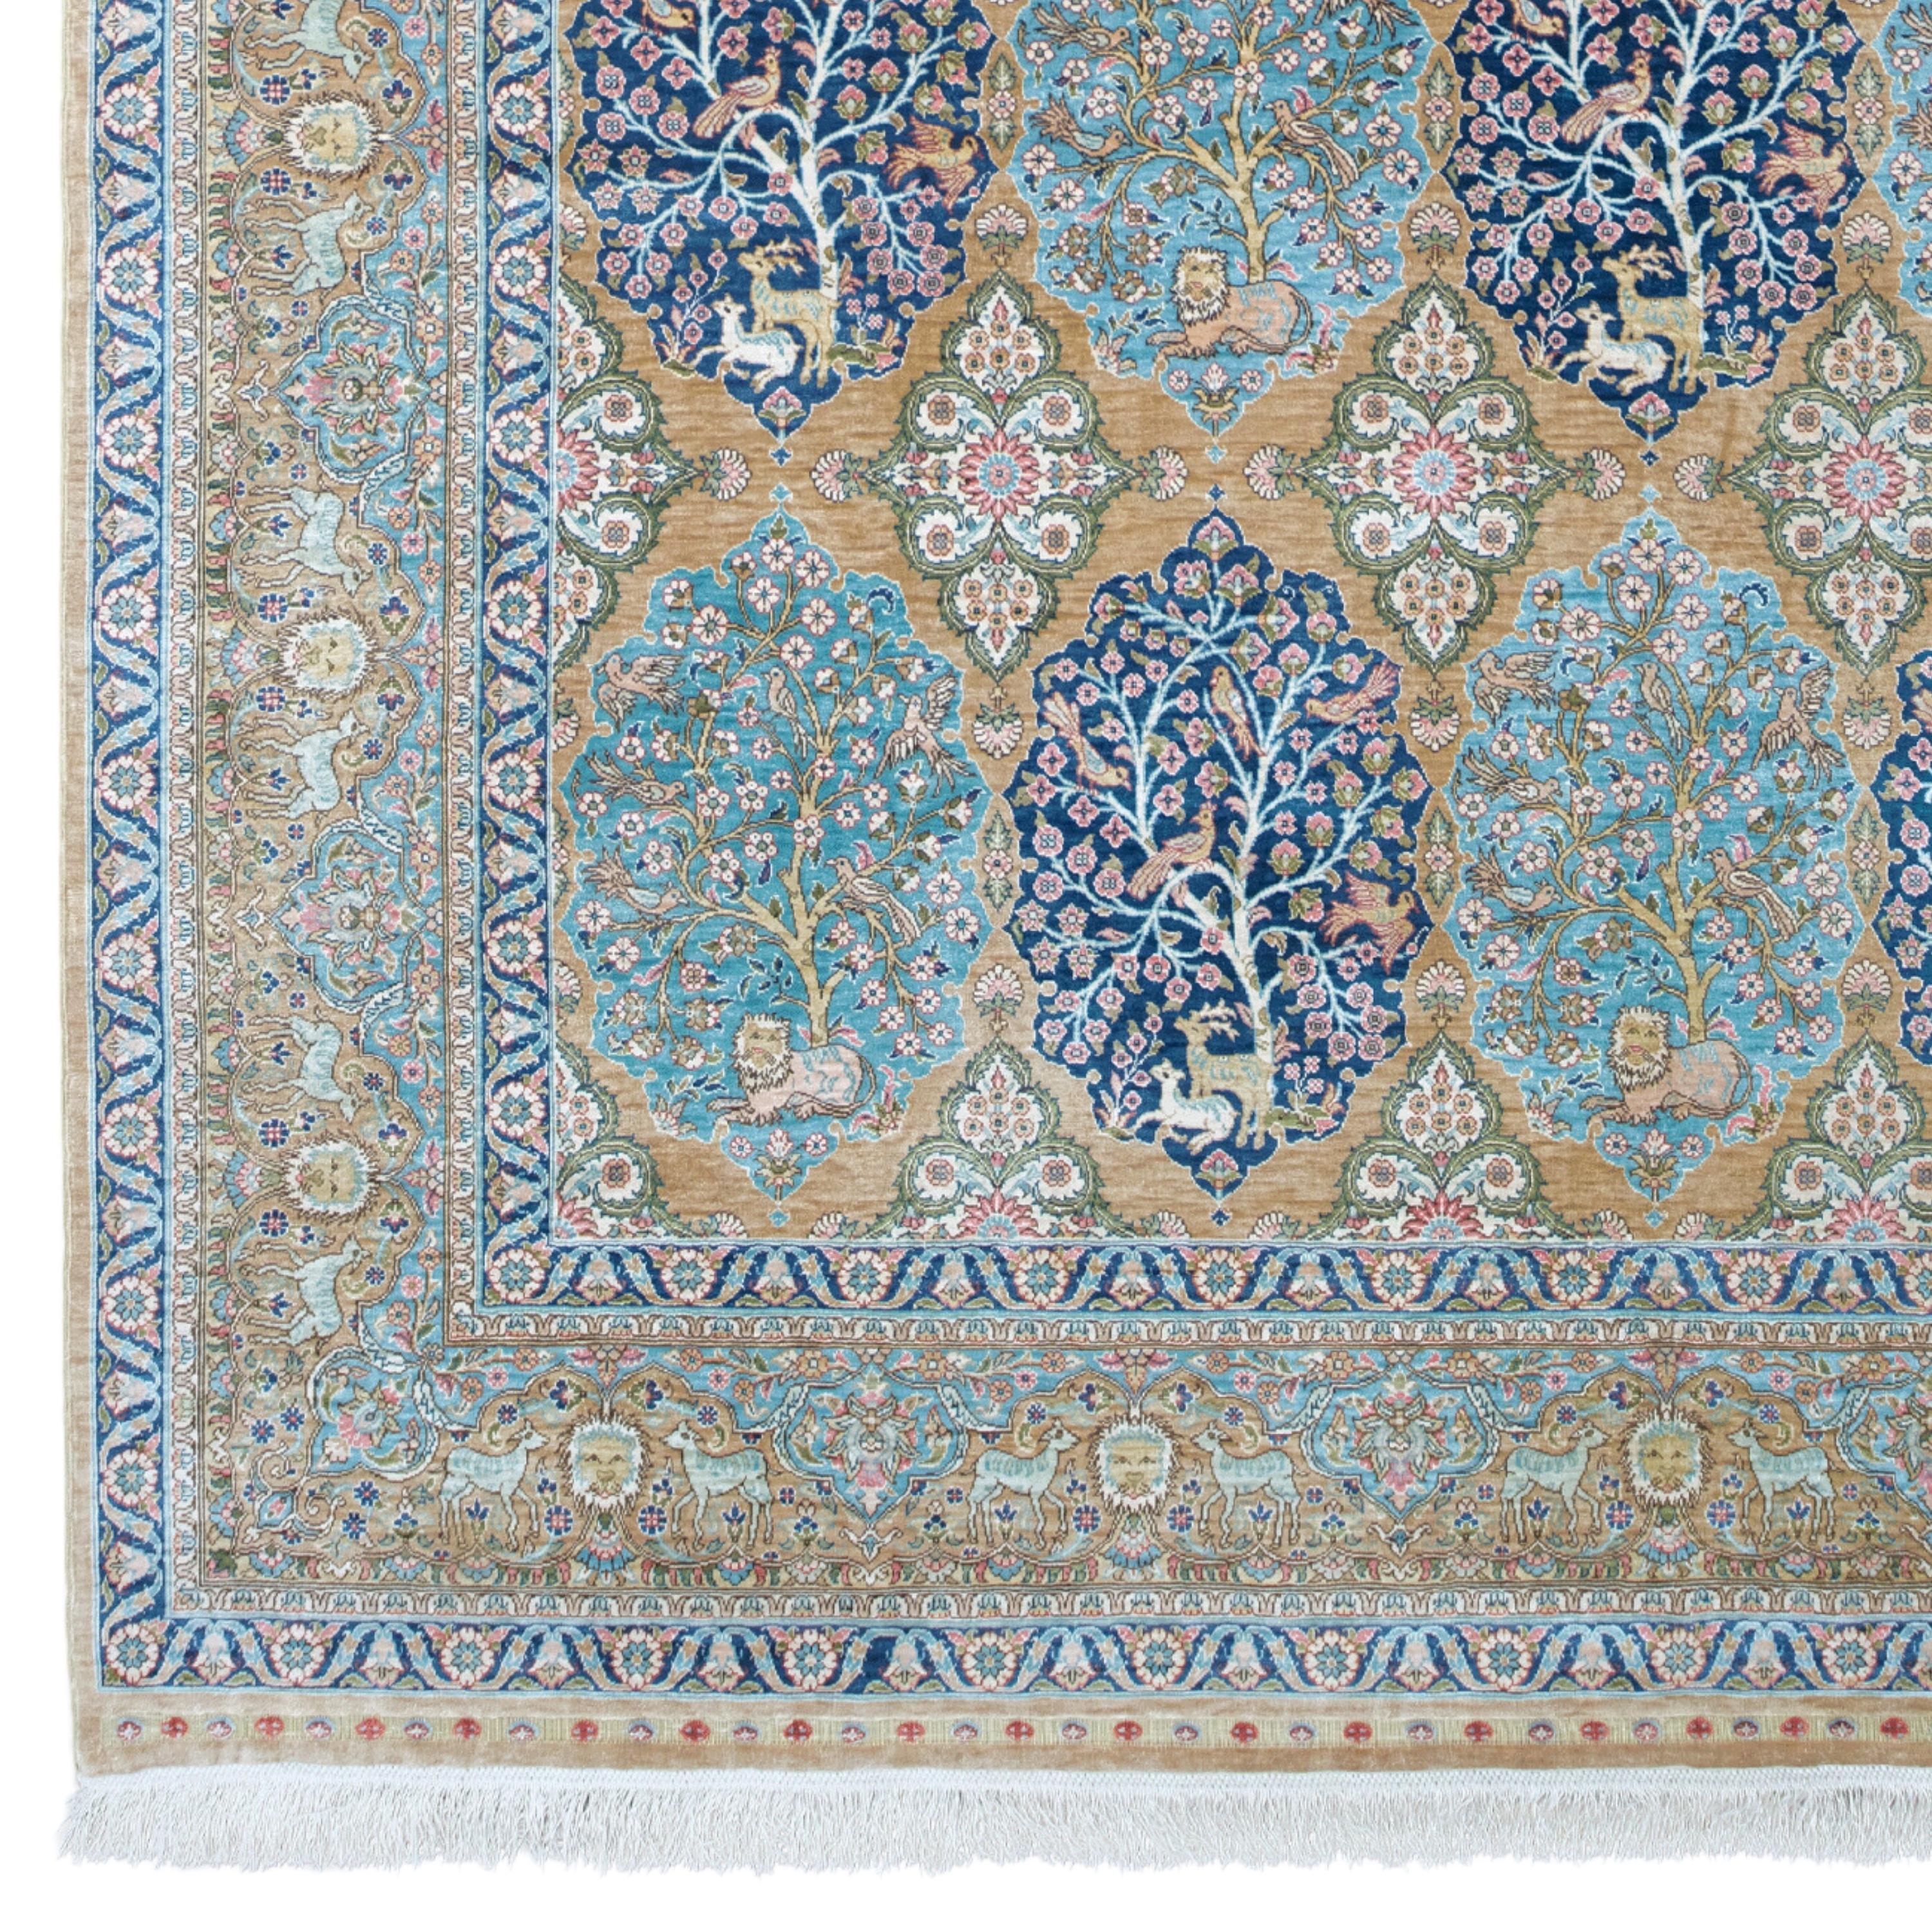 Early 20th Century Hereke Silk Carpet

A Timeless Weaving Wonder This elegant early 20th century antique silk Hereke carpet attracts attention with its rich color palette and intricate patterns. The central medallion designs and detailed edge work